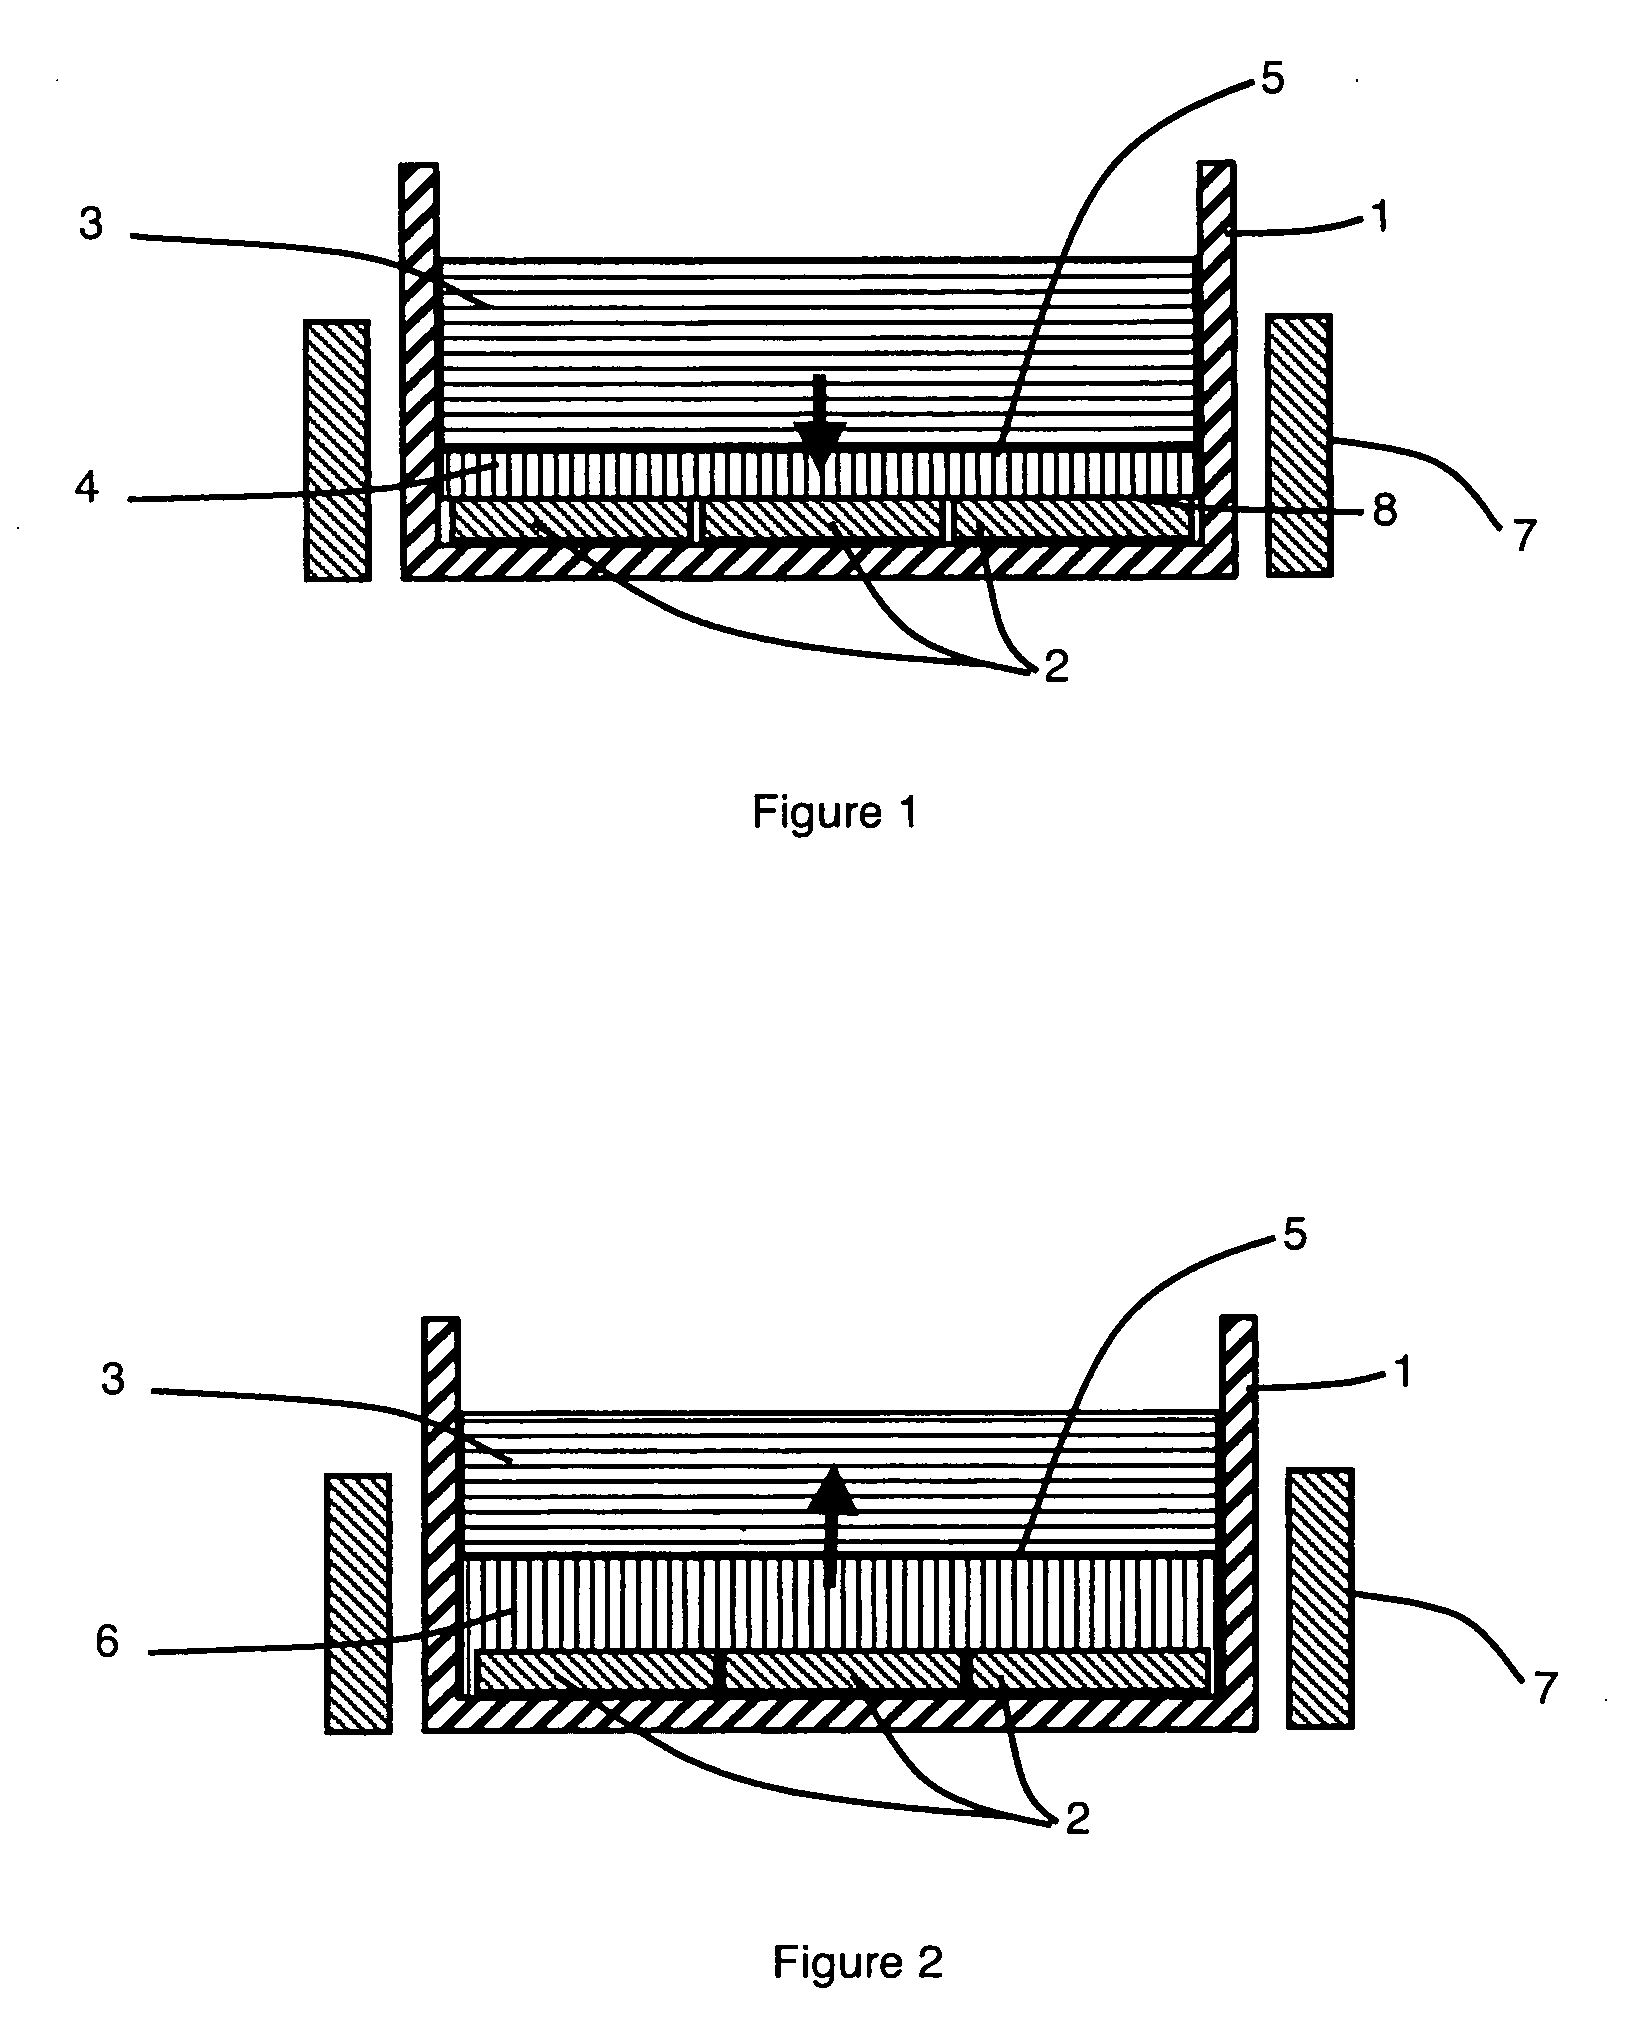 Method of purifying metallurgical silicon by directional solidification